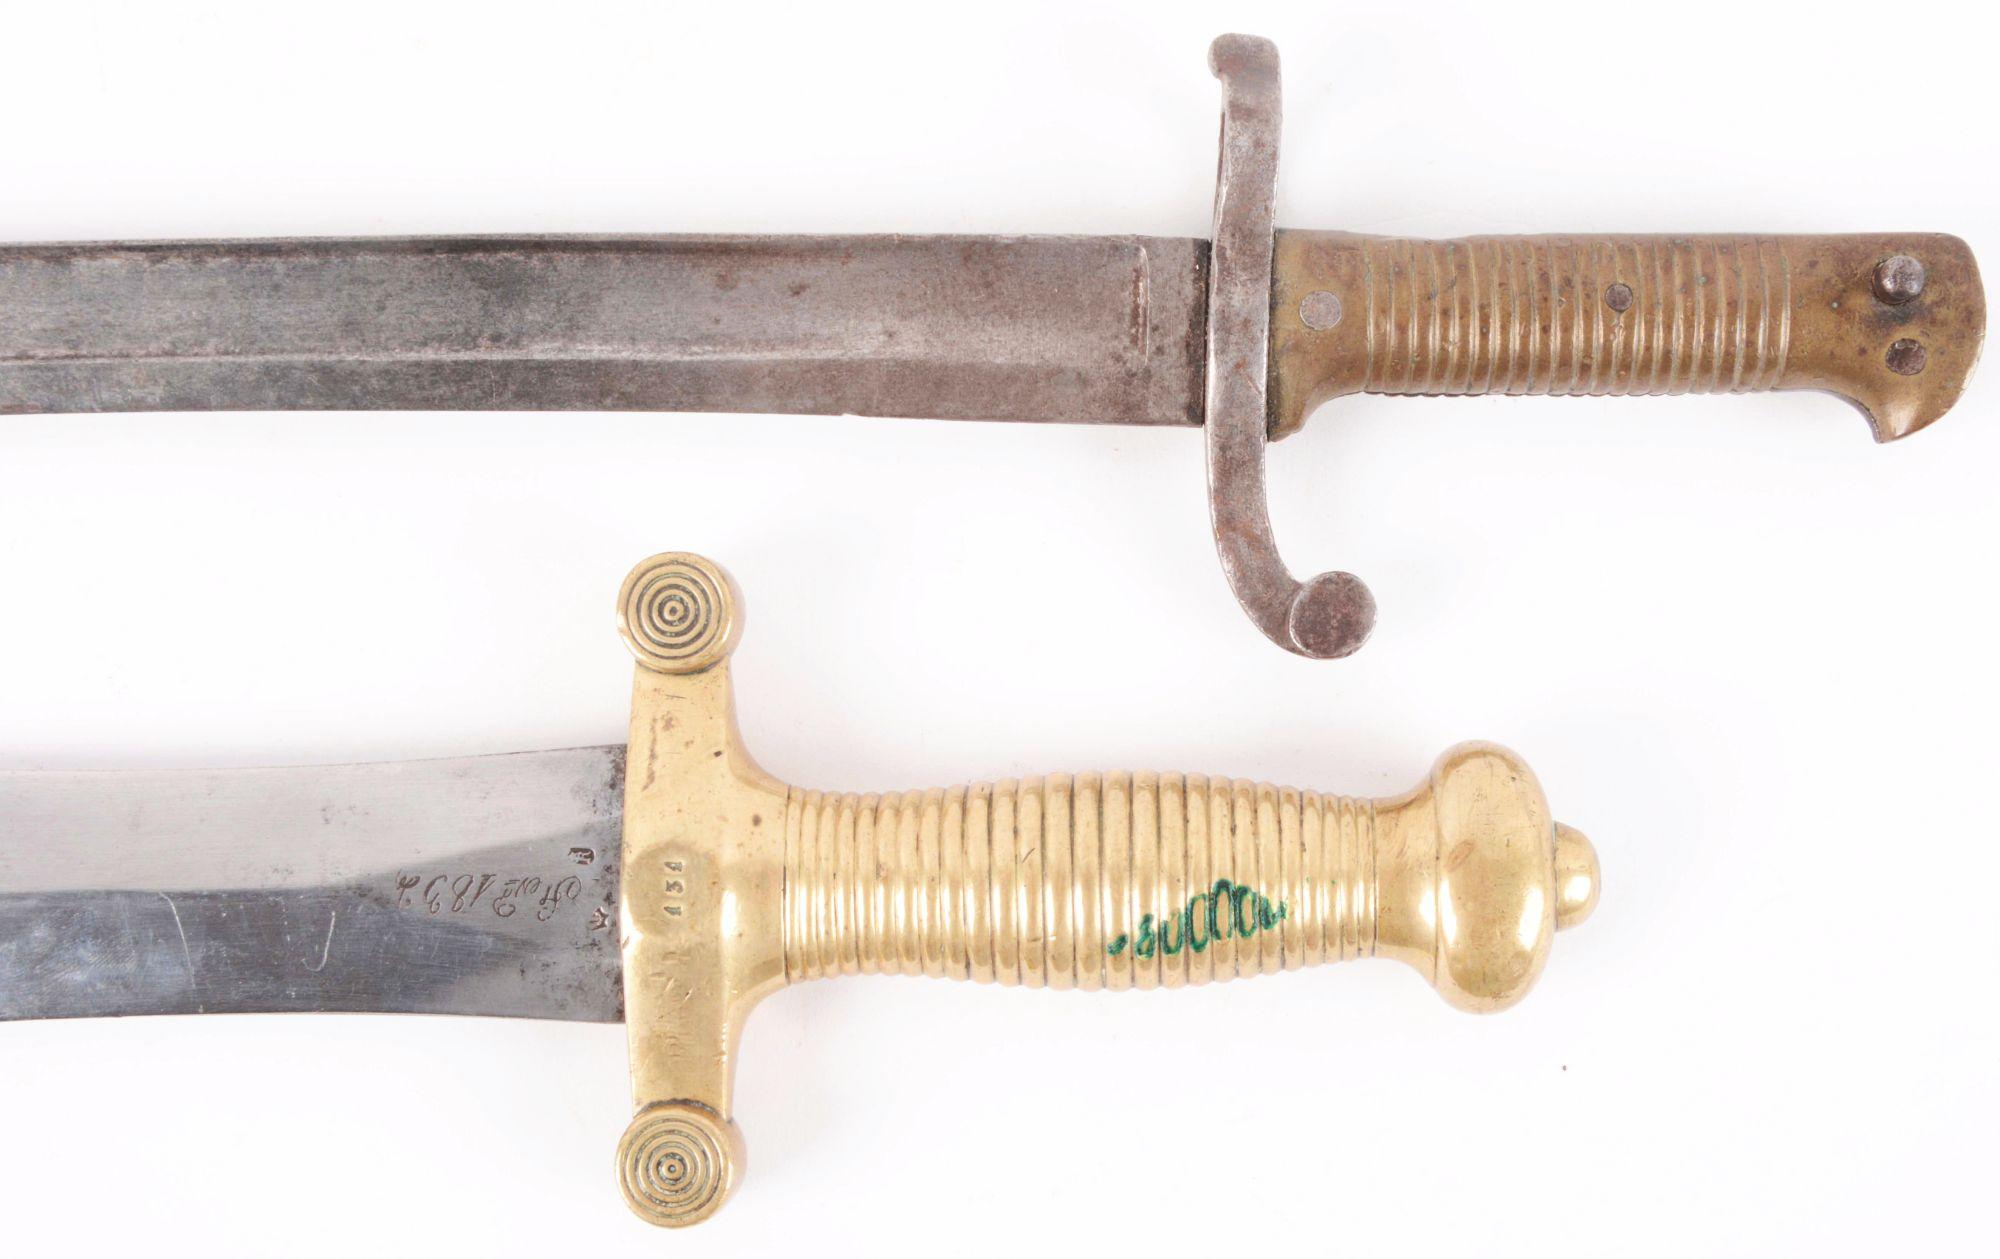 LOT OF 2: FRENCH EDGED WEAPONS